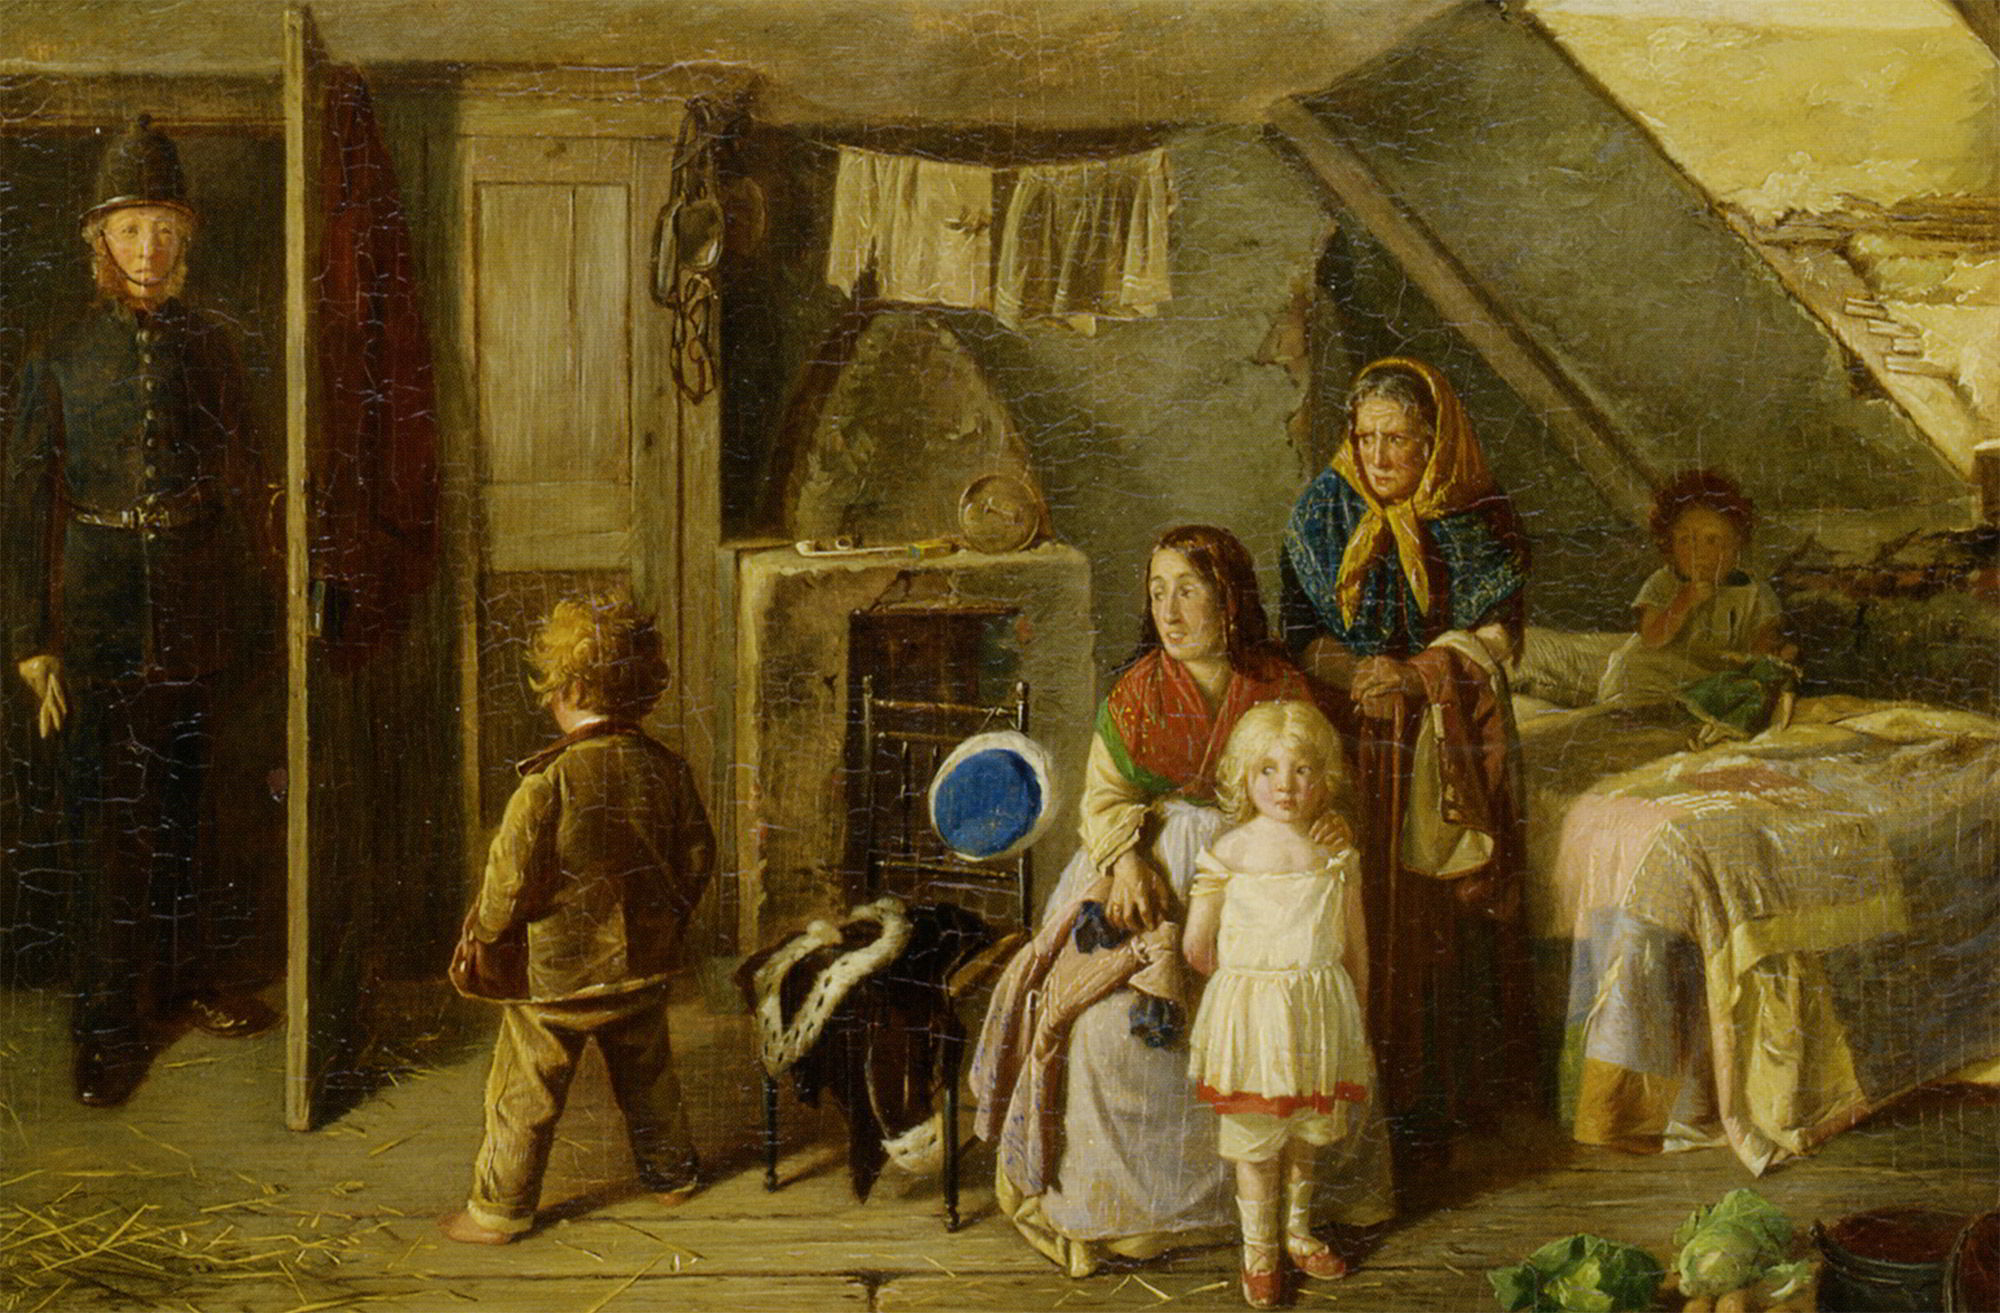 The Stolen Child by Charles Hunt